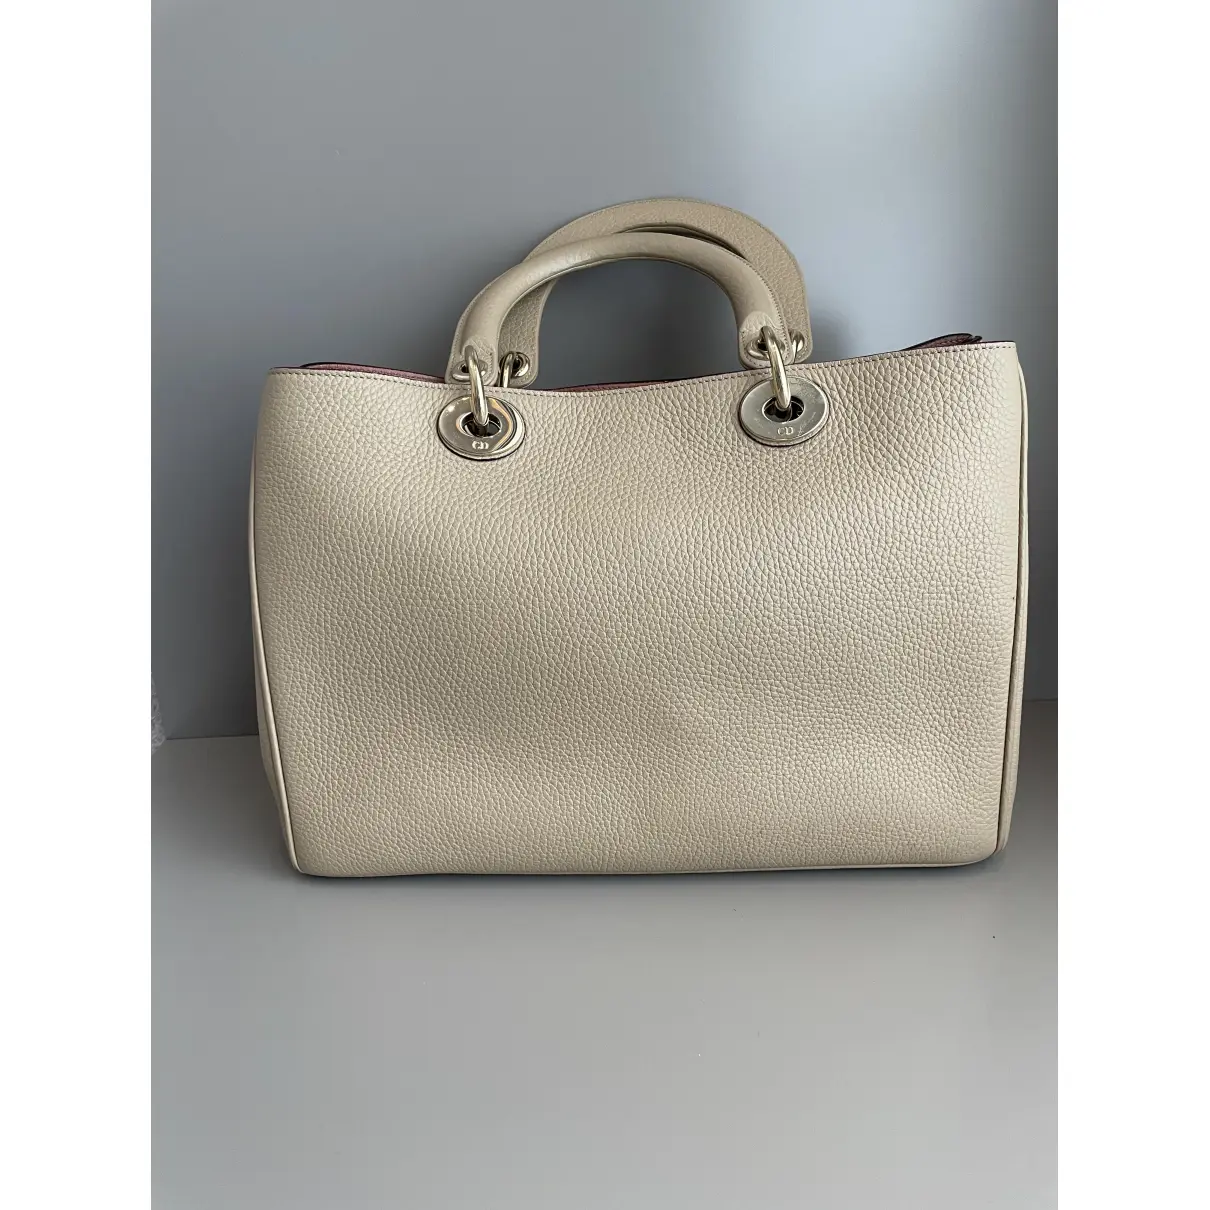 Buy Dior Diorissimo leather tote online